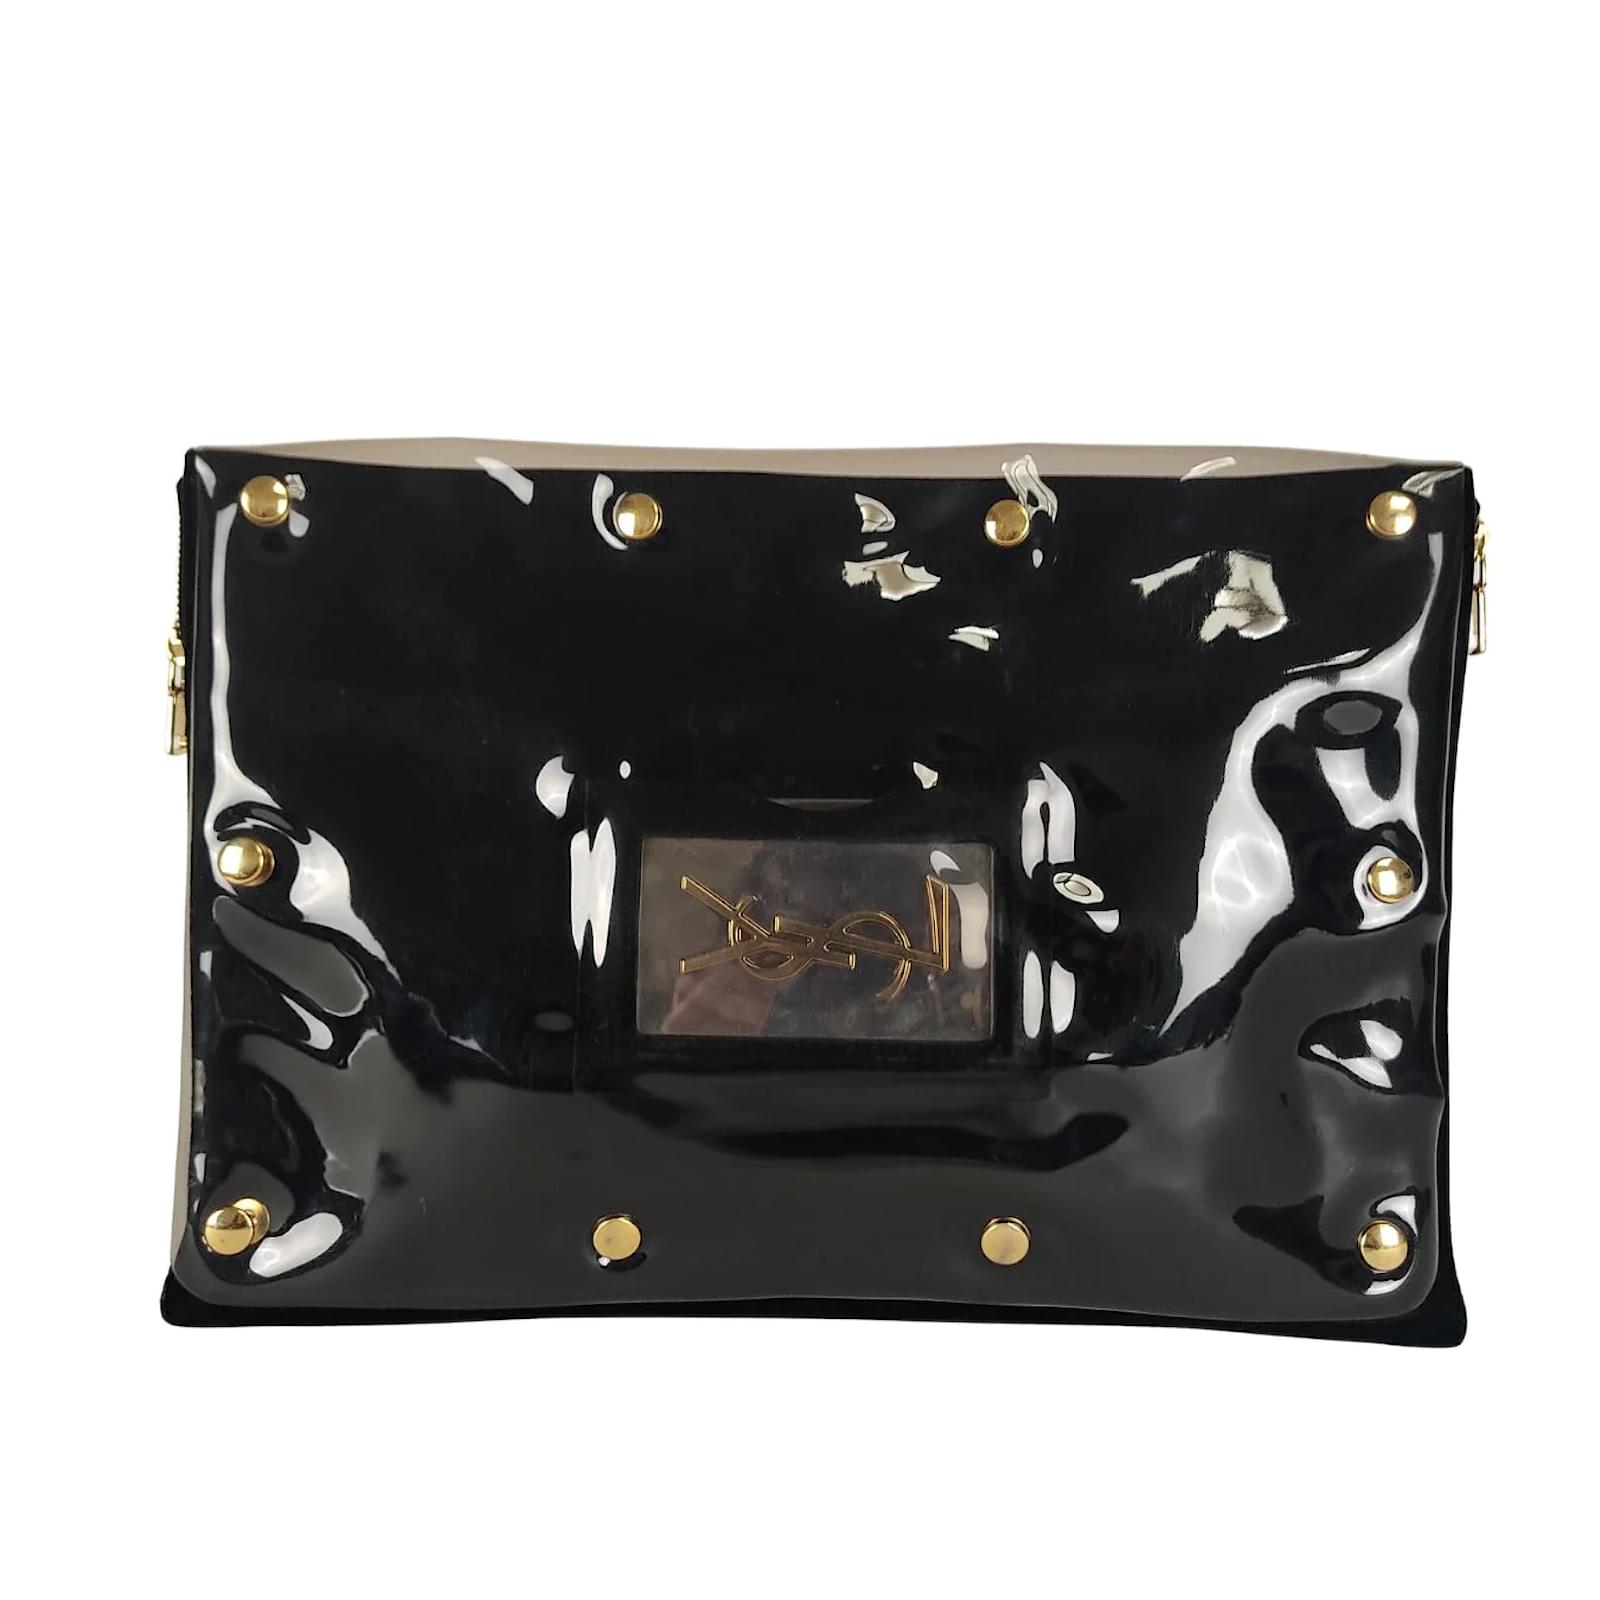 Envelope patent-leather clutch bag